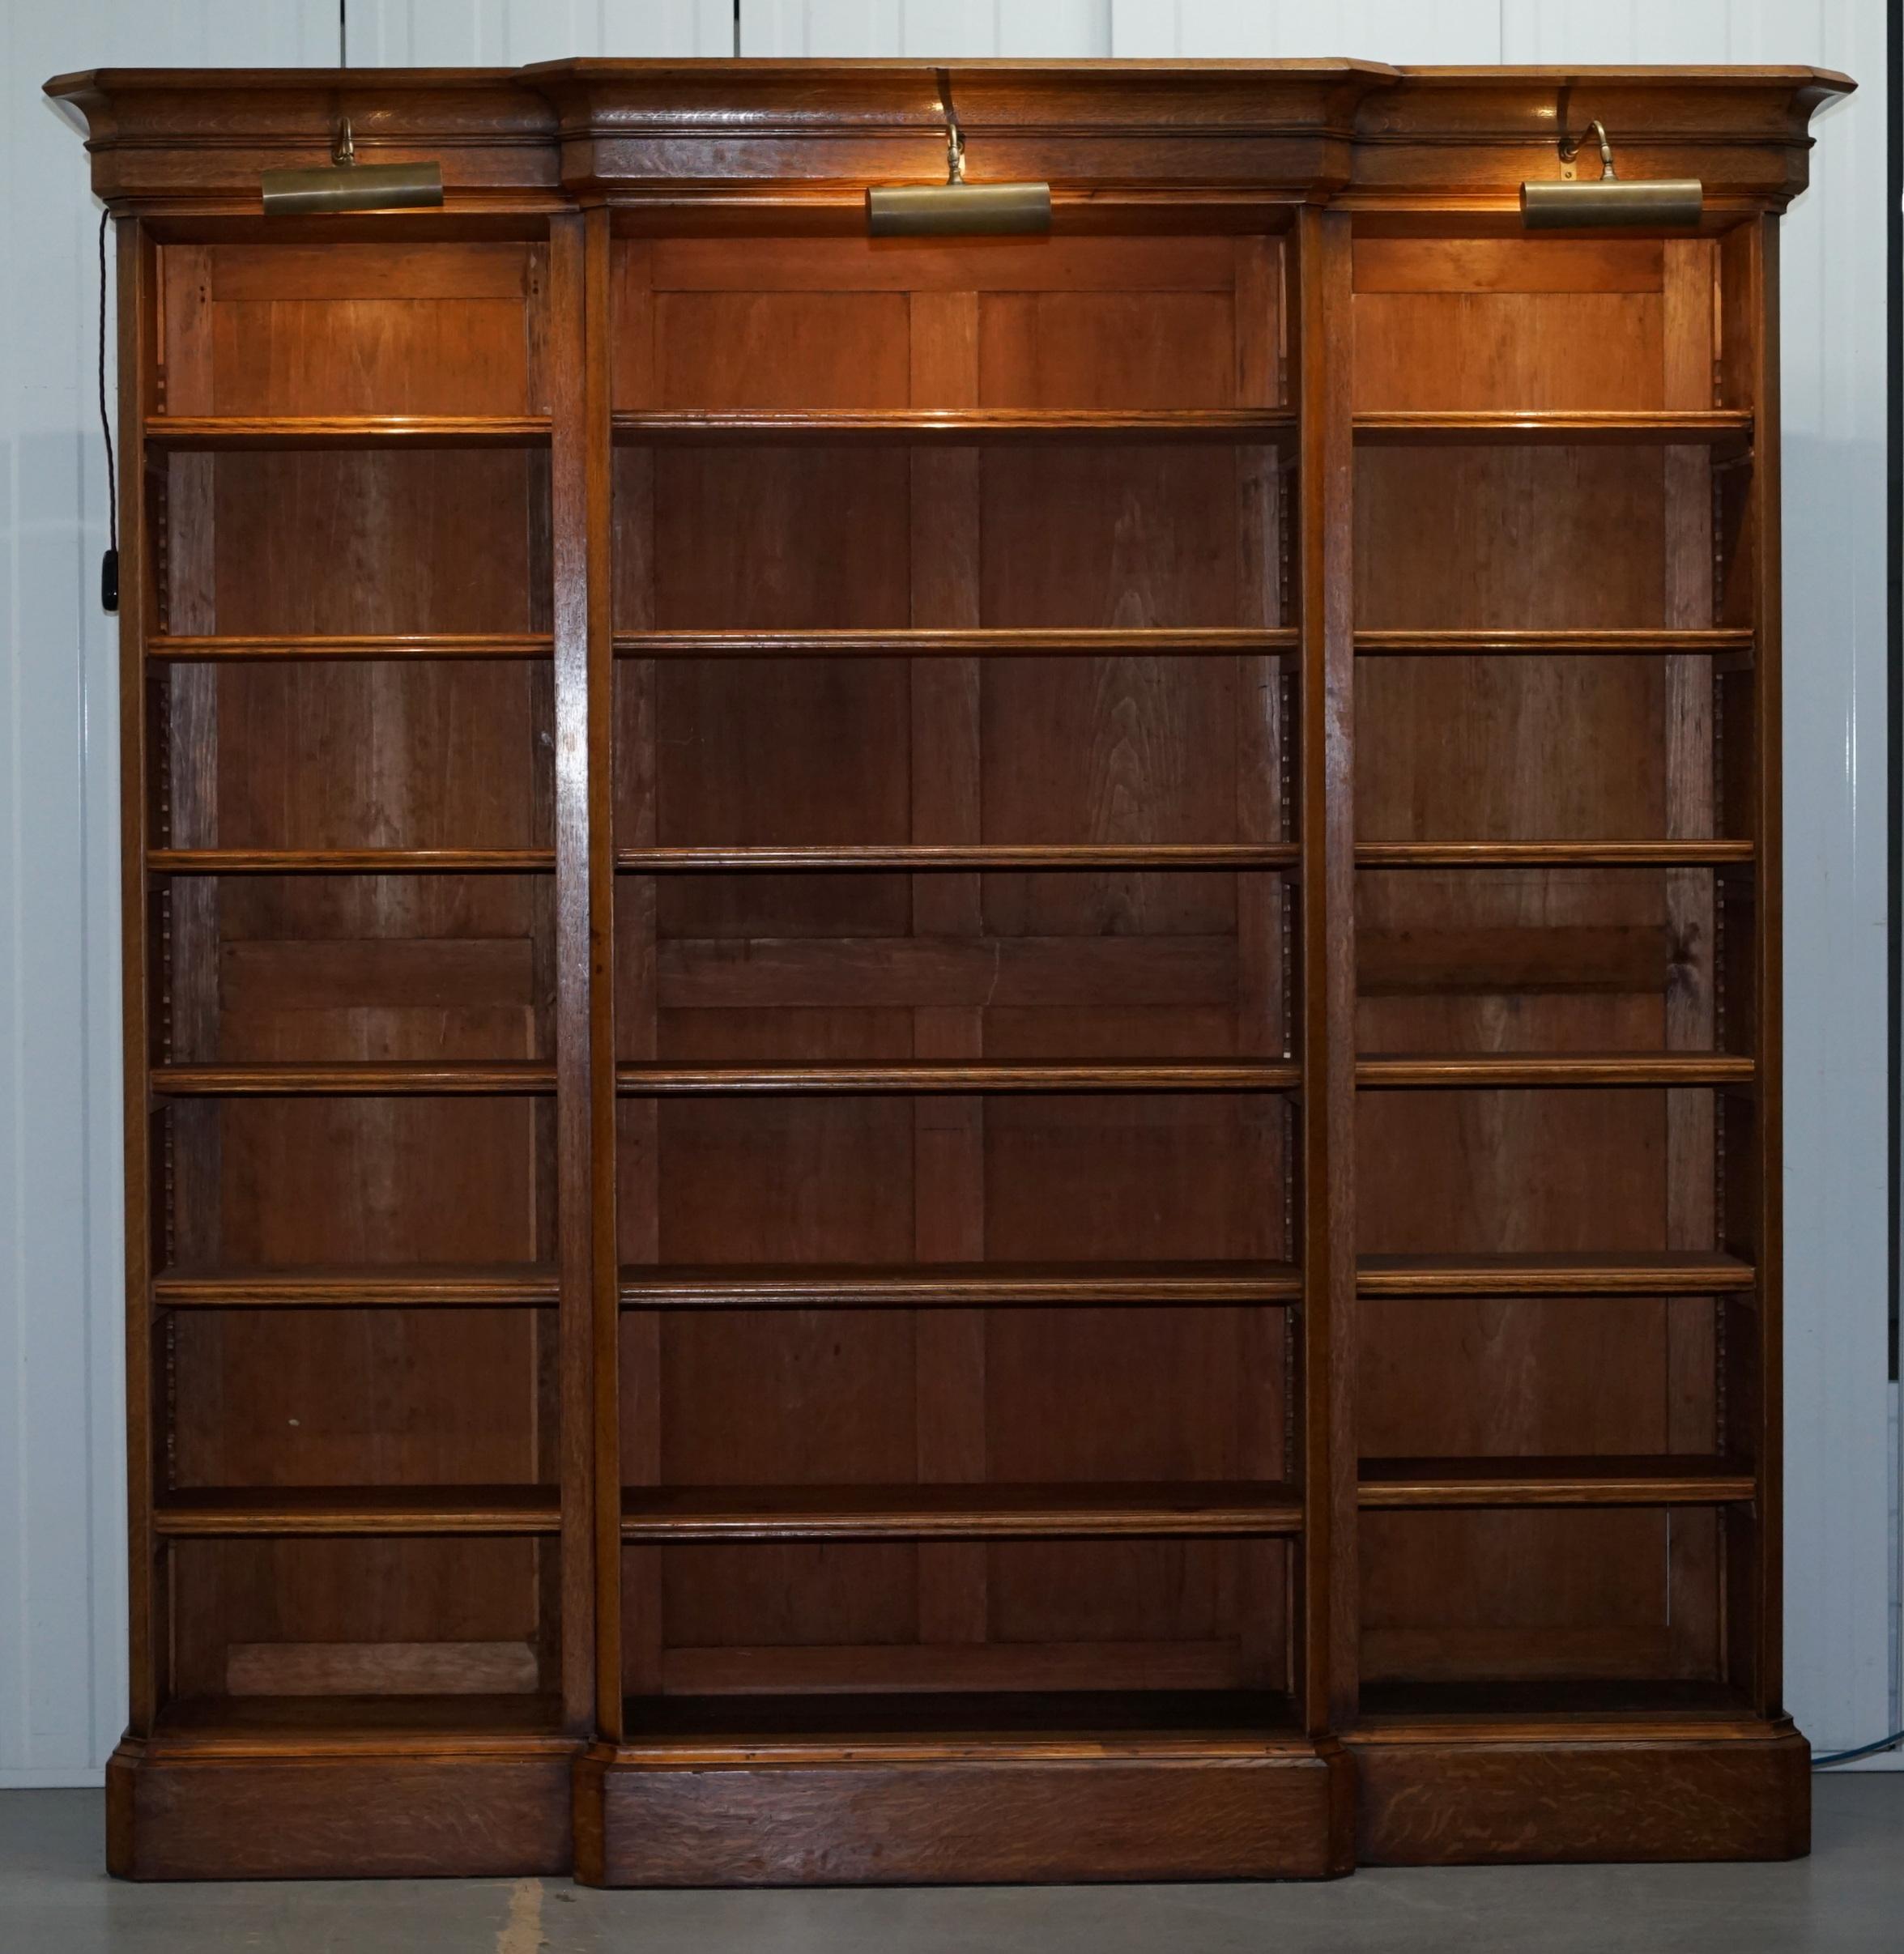 We are delighted to offer for sale this very important looking Victorian Oak Breakfront Library bookcase with three lights

A fantastically well made piece, the shelves are all removable and or height adjustable from top to bottom, the bookcase